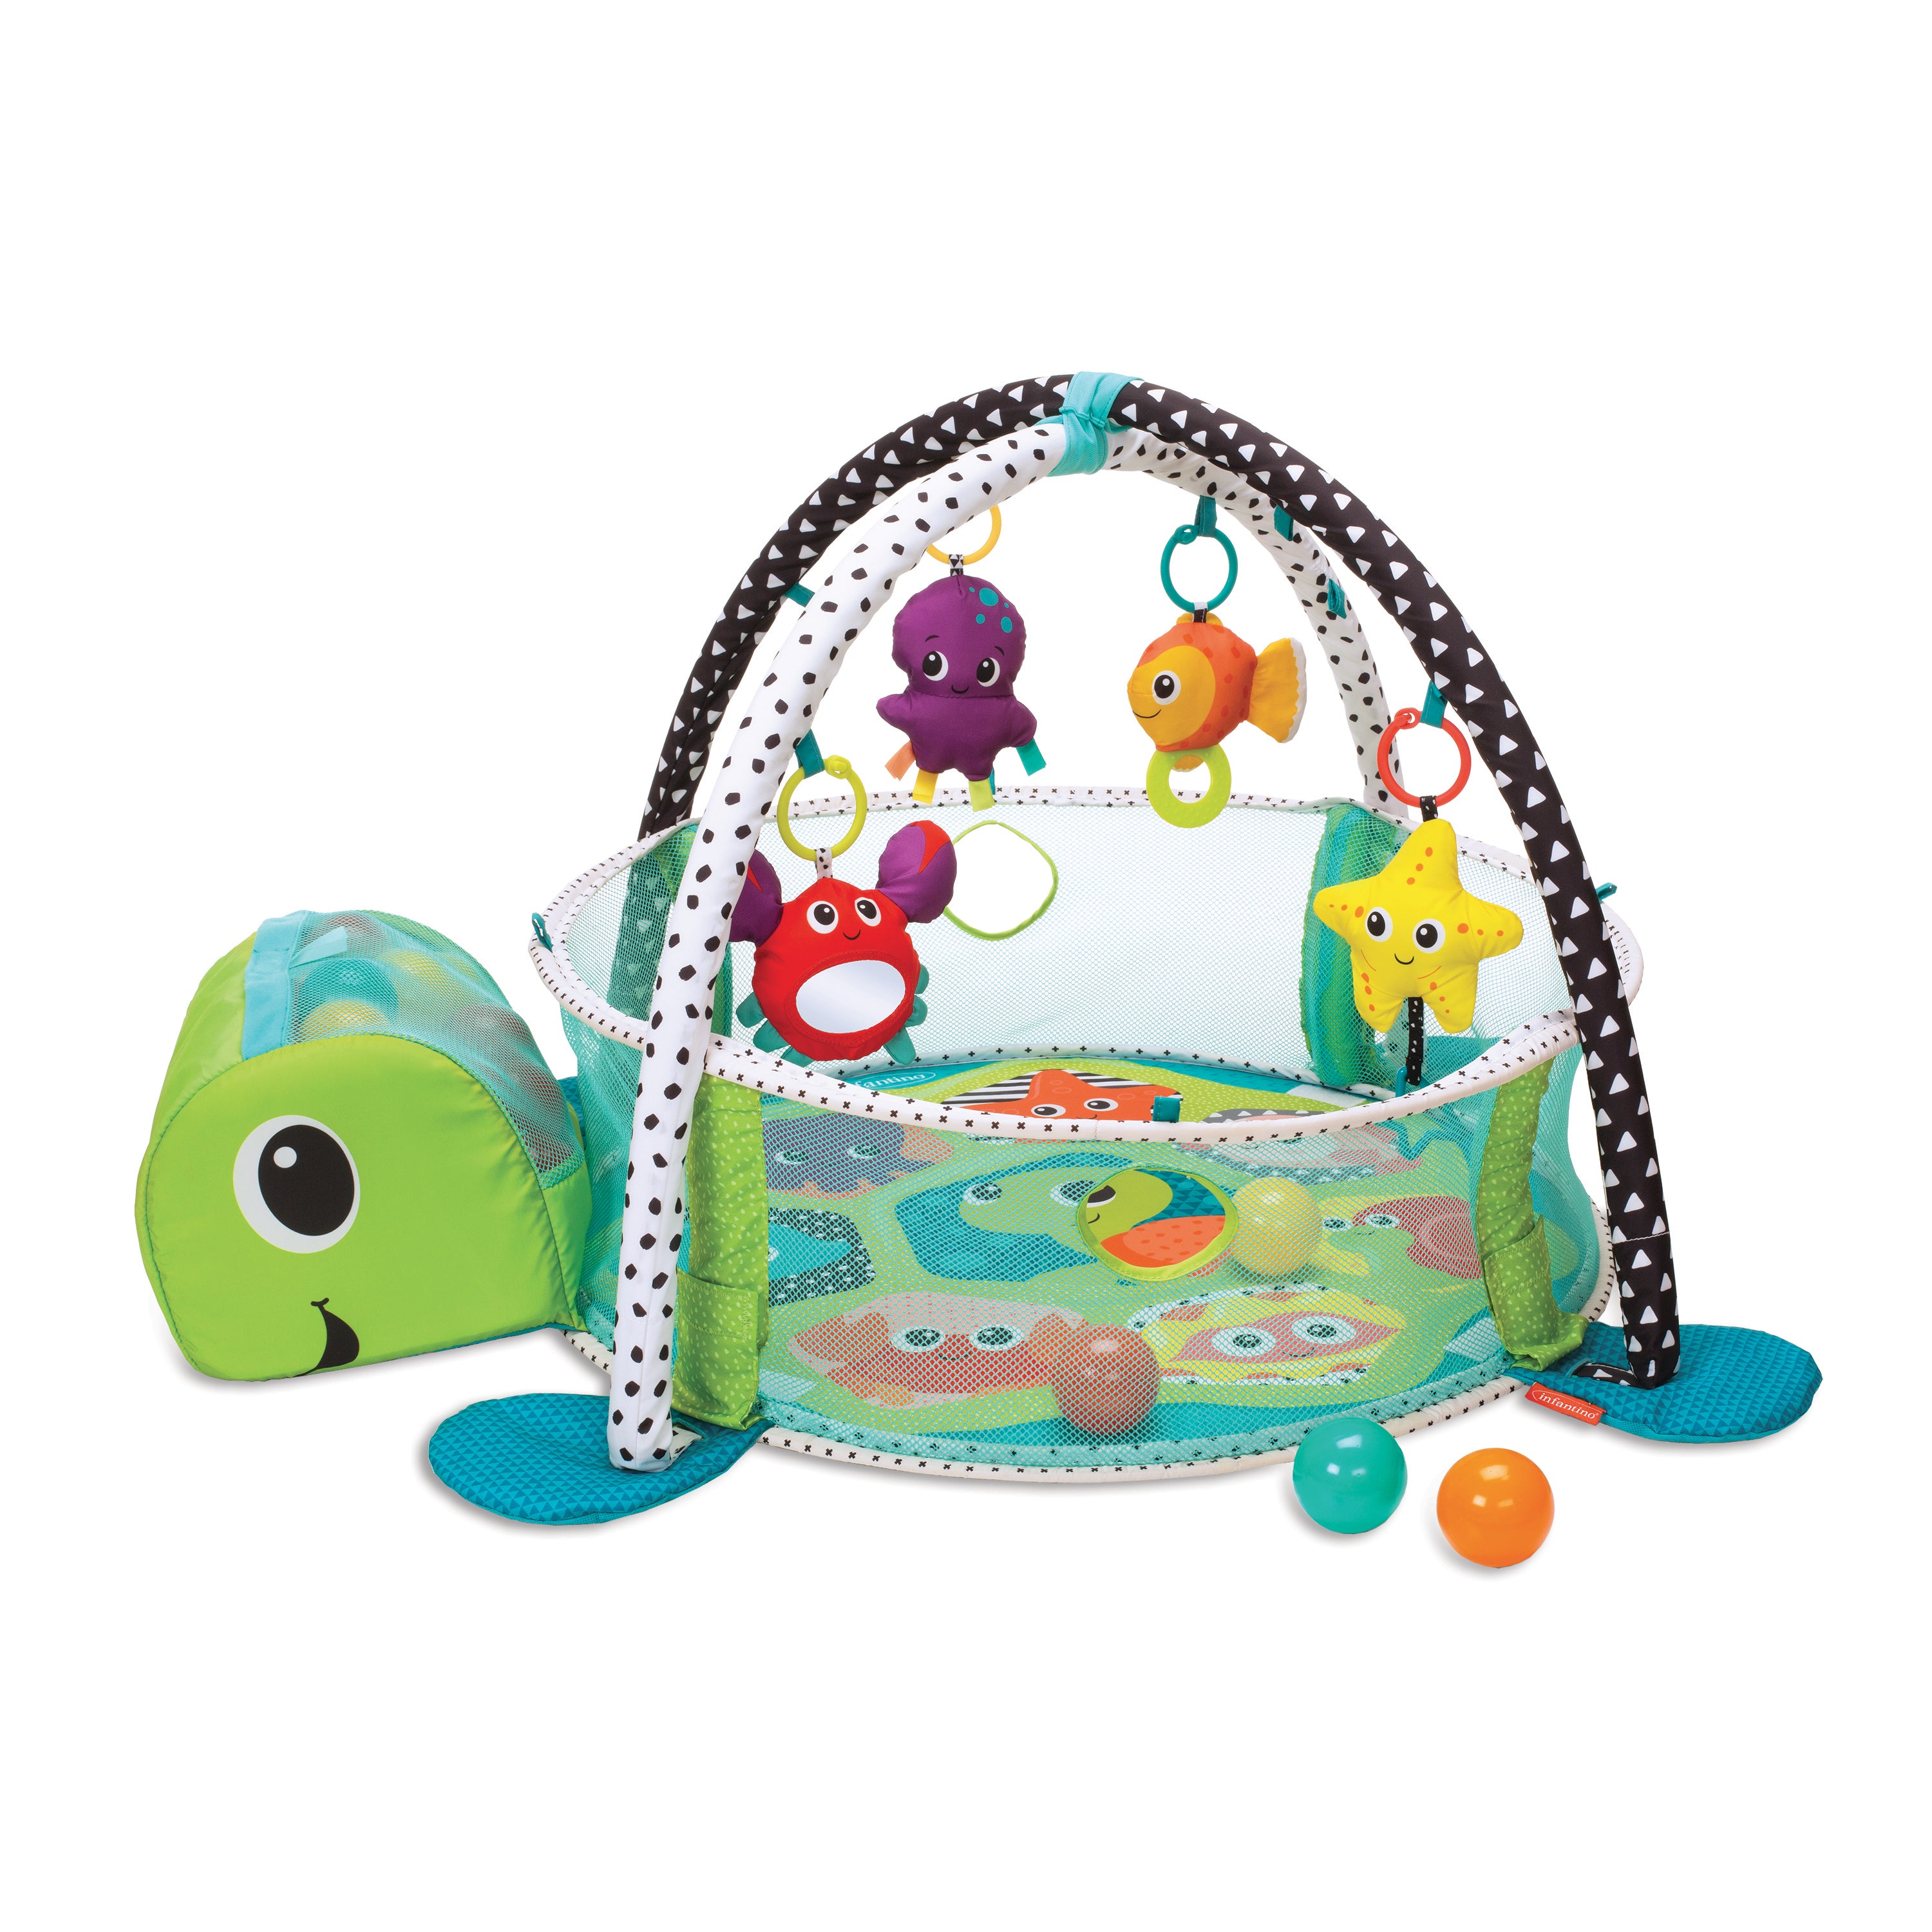 Grow-With-Me Activity Gym \u0026 Ball Pit 